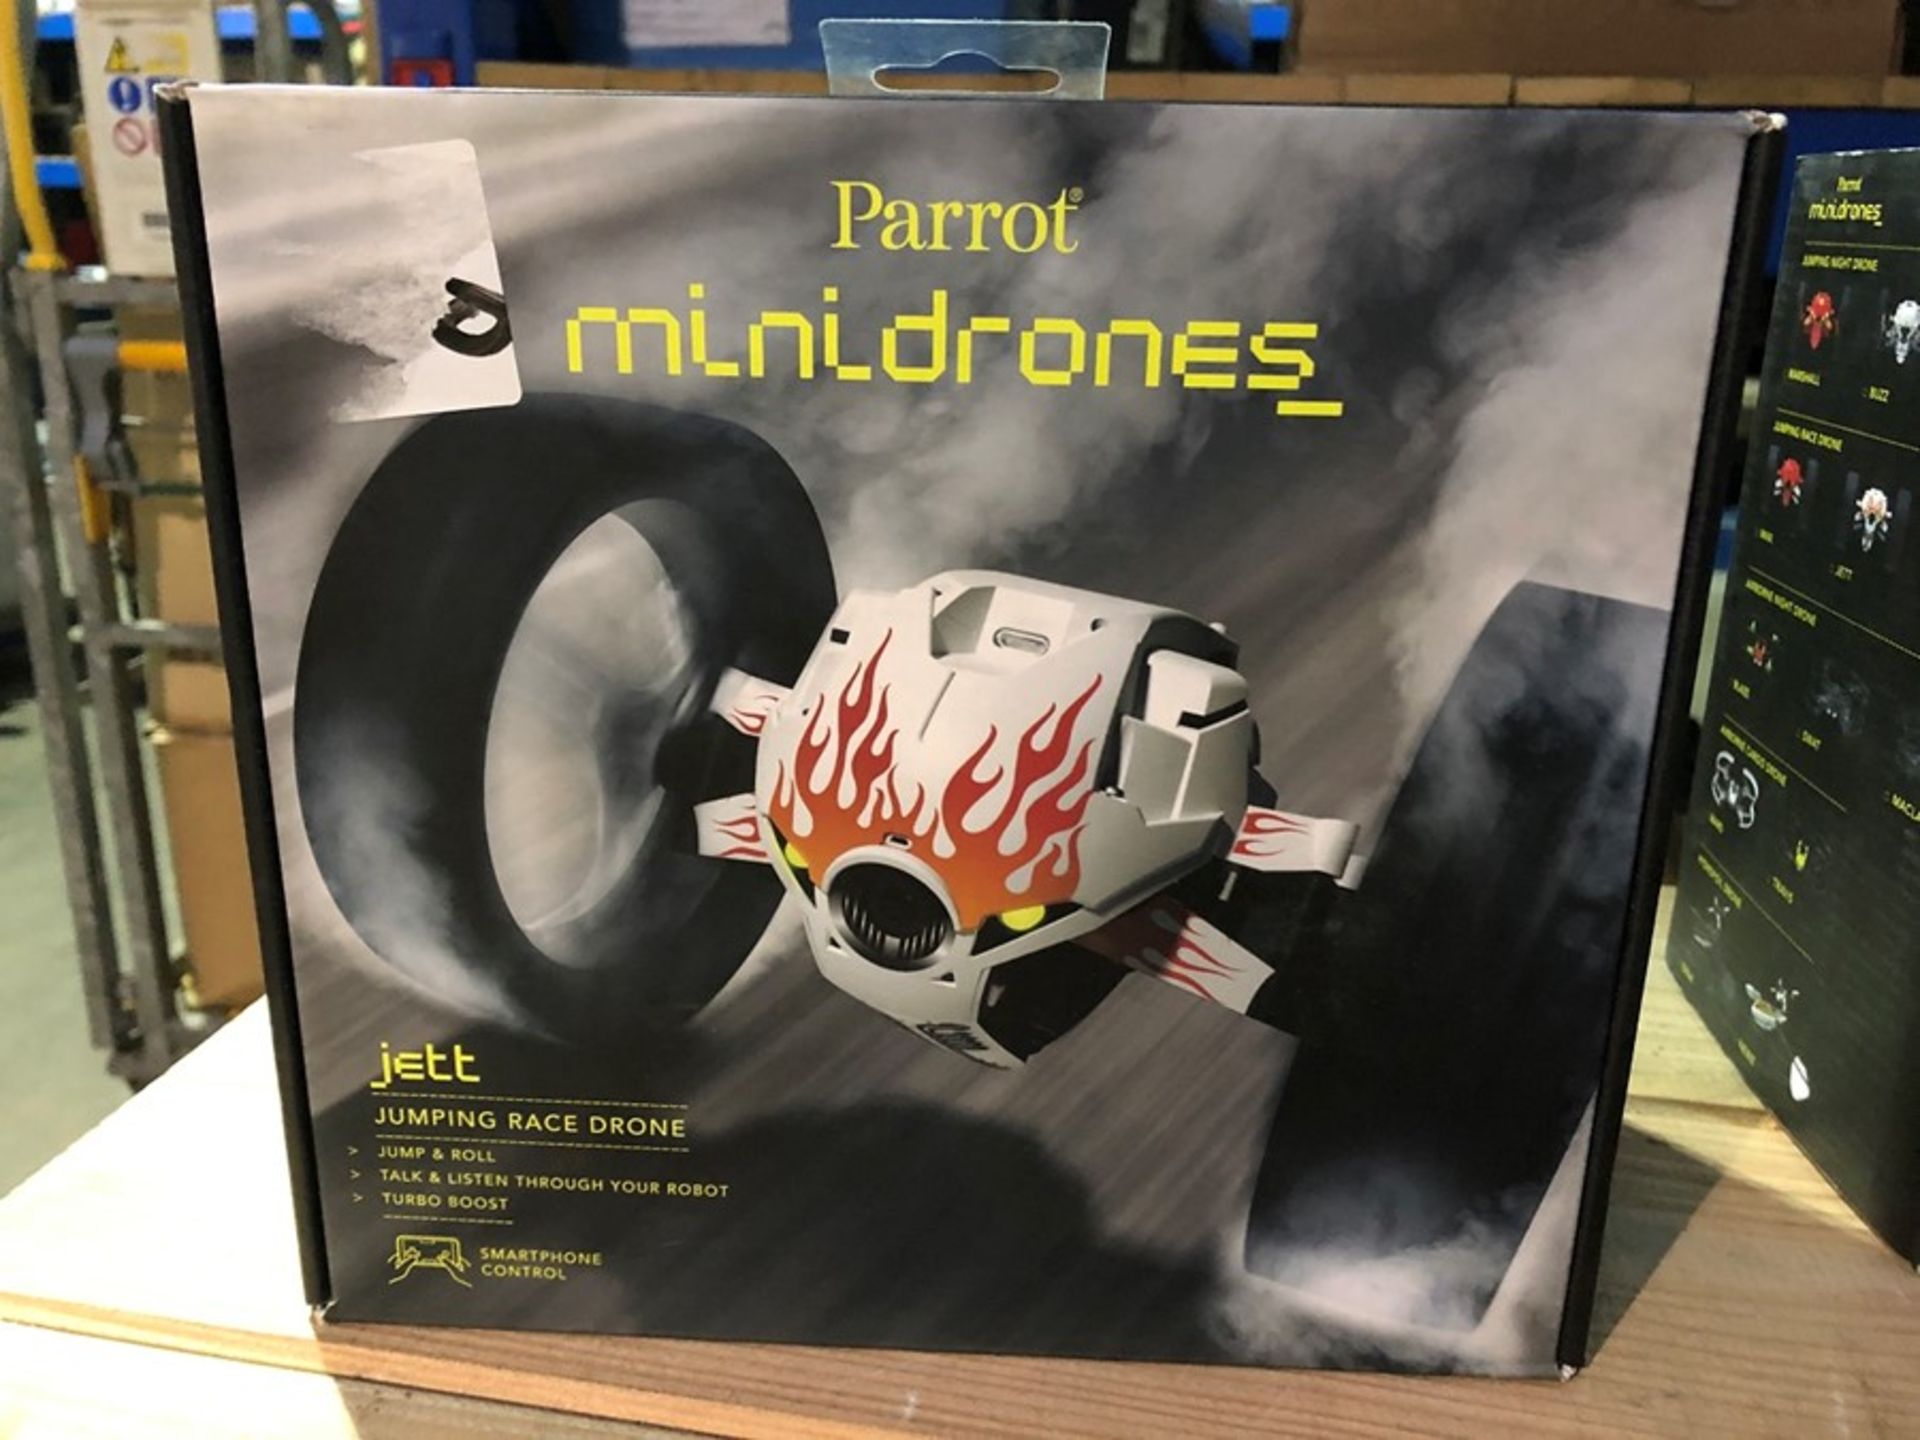 1 BOXED PARROT MINIDRONES - JETT / RRP £59.95 (PUBLIC VIEWING AVAILABLE)